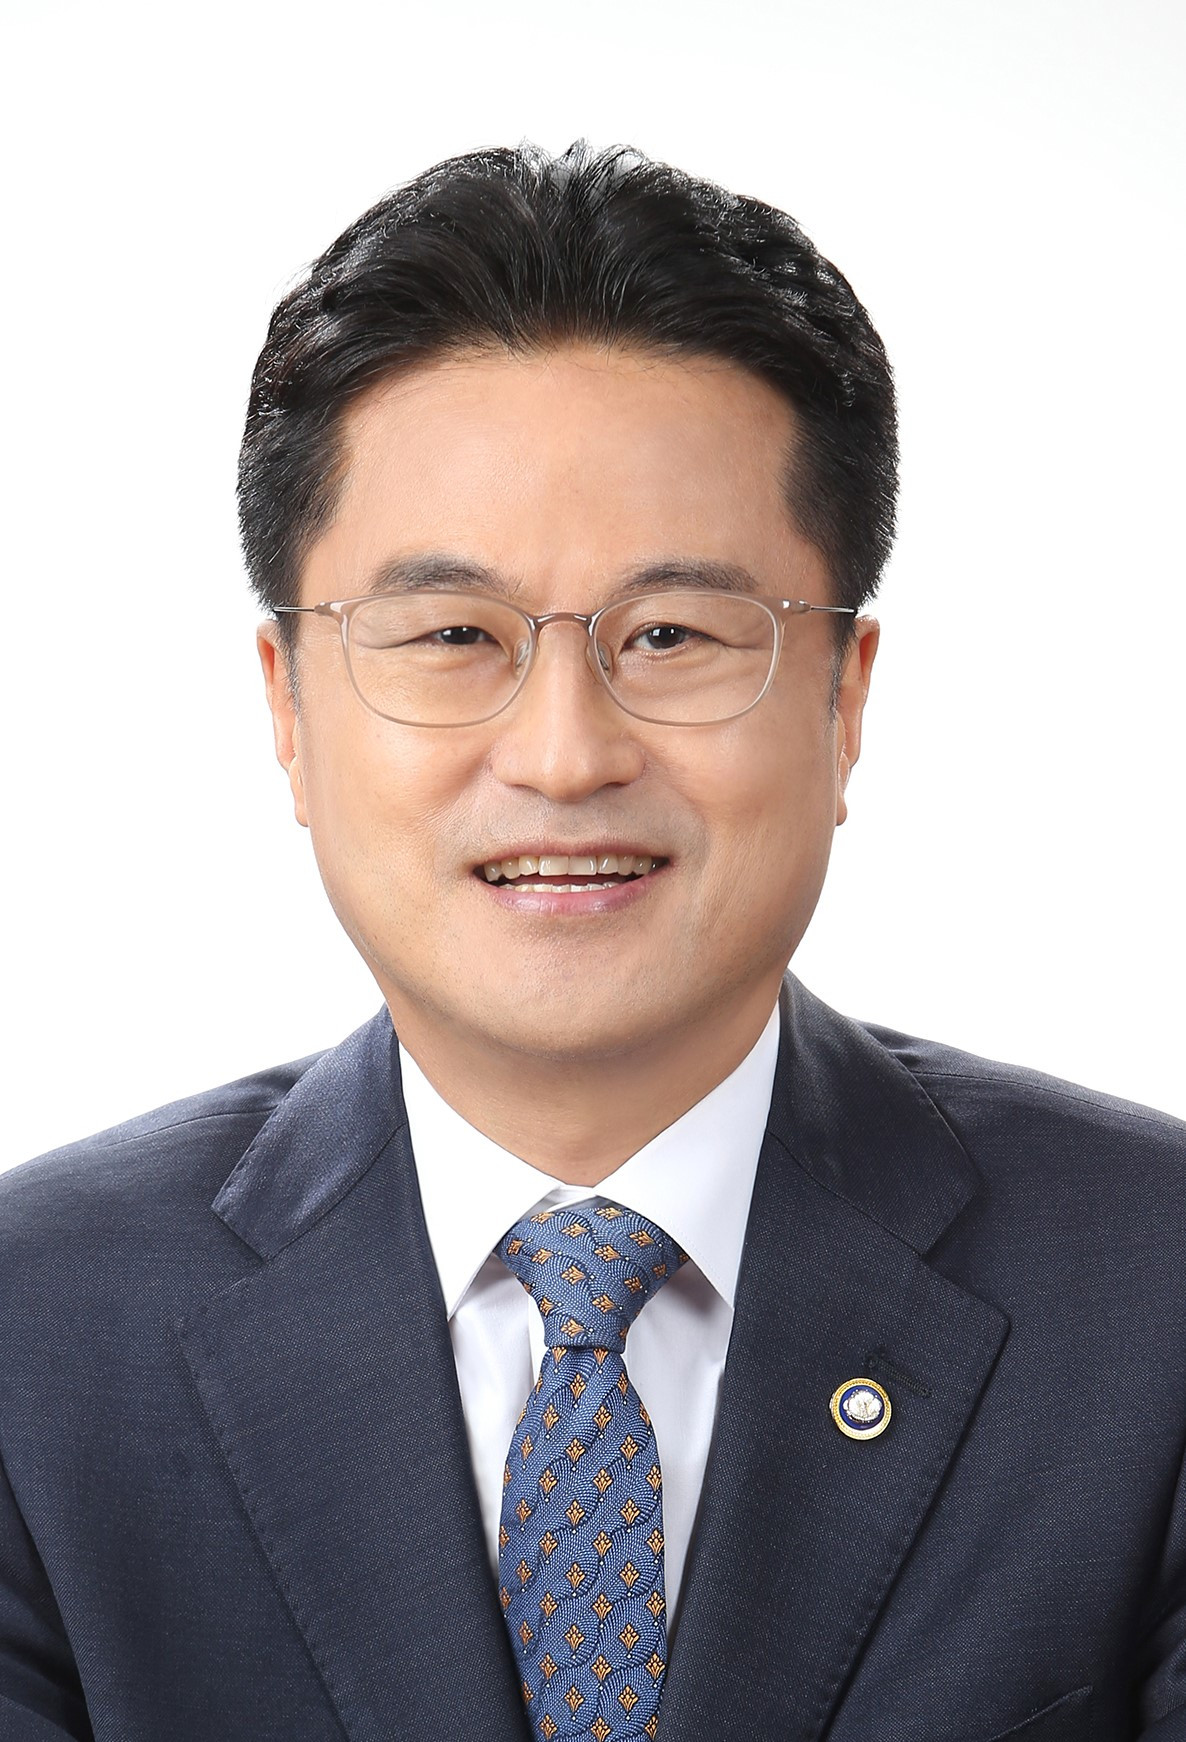 Kim Chung-woo, the administrator of the Public Procurement Service